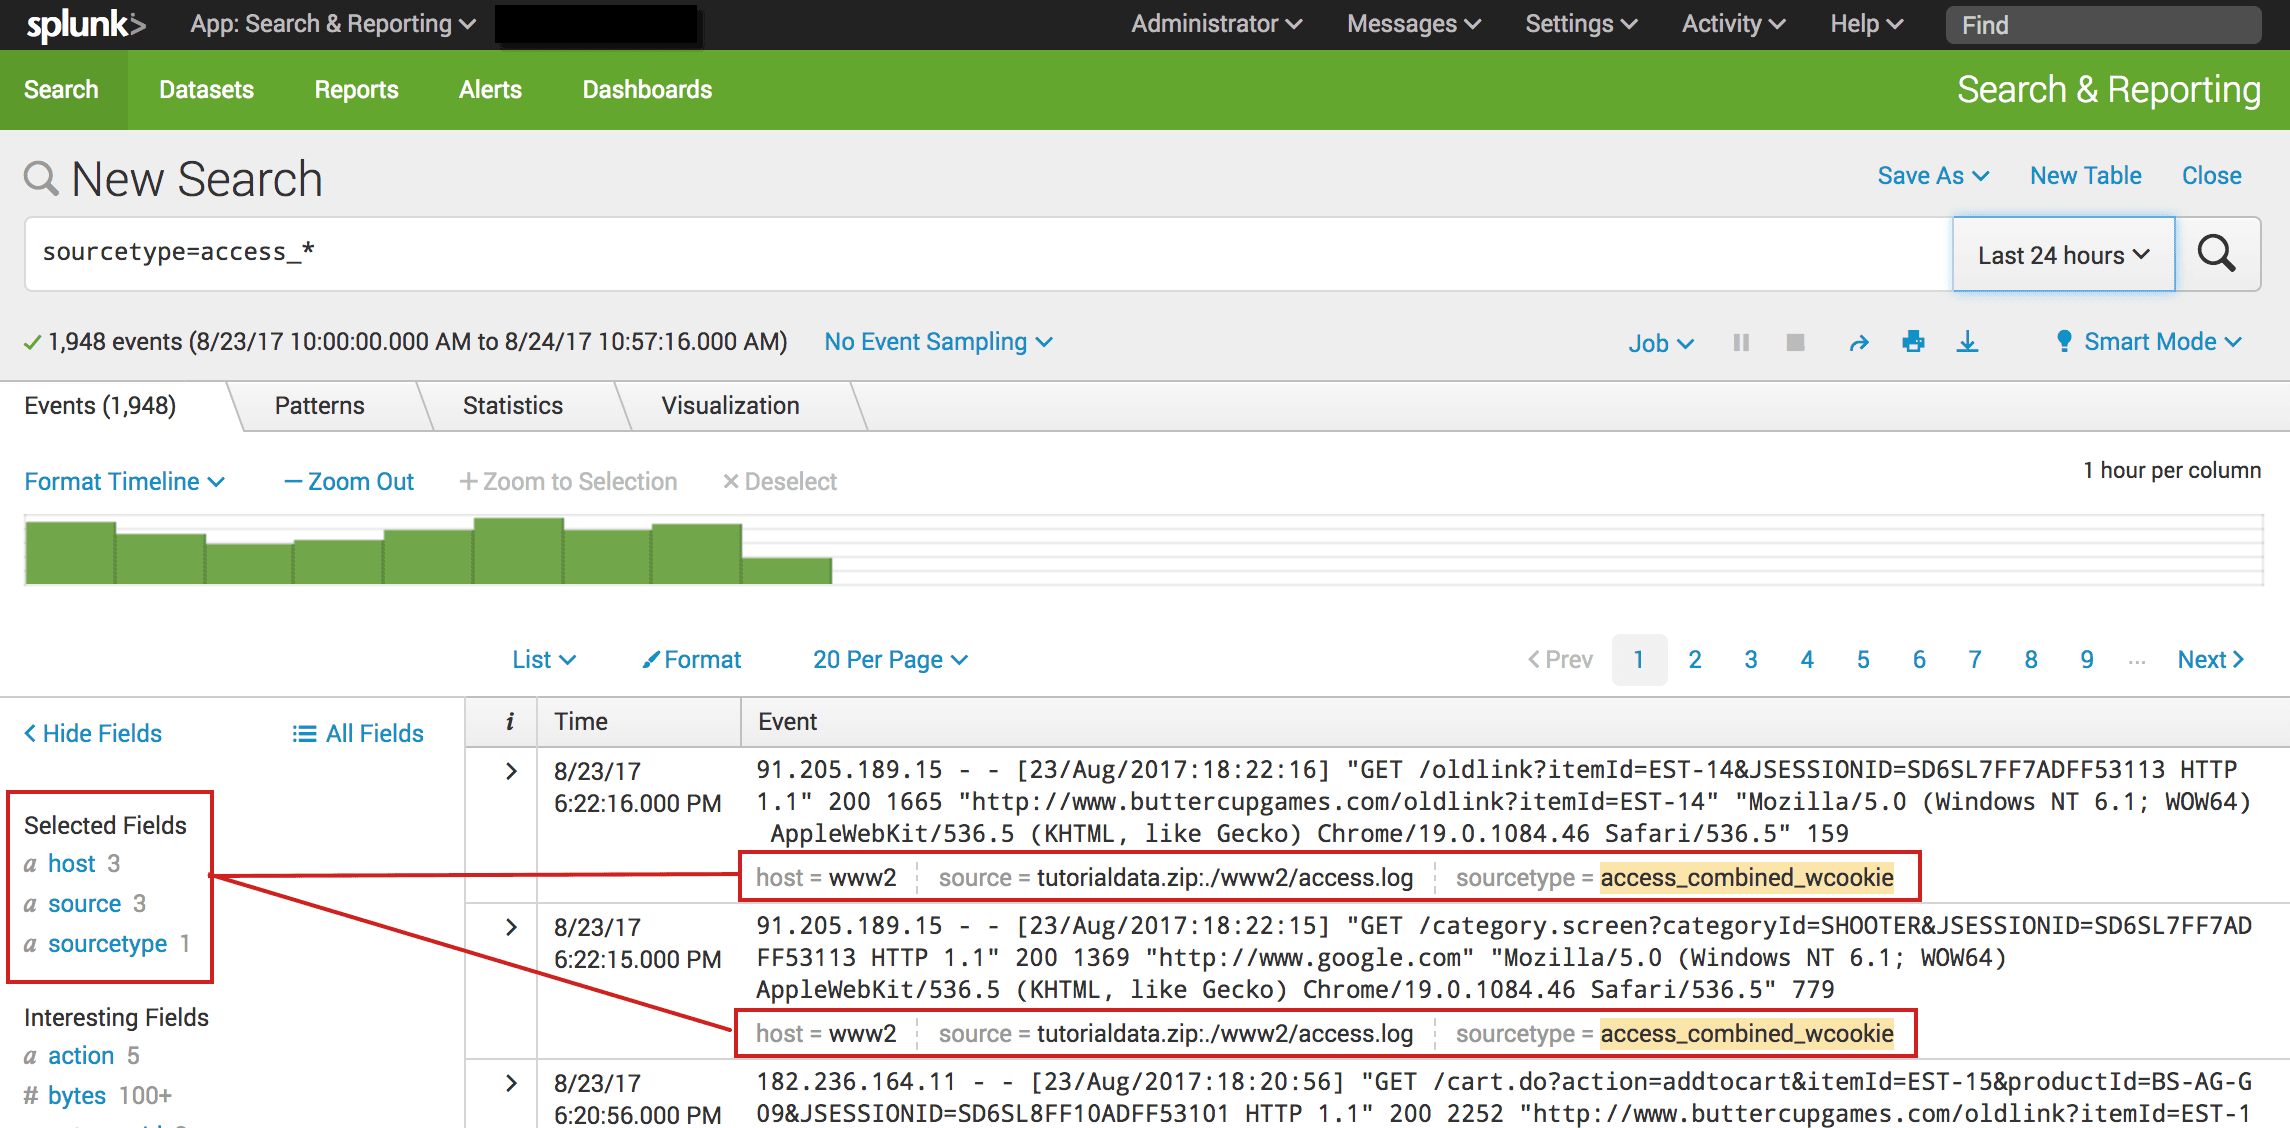 splunk group by field and count by another field